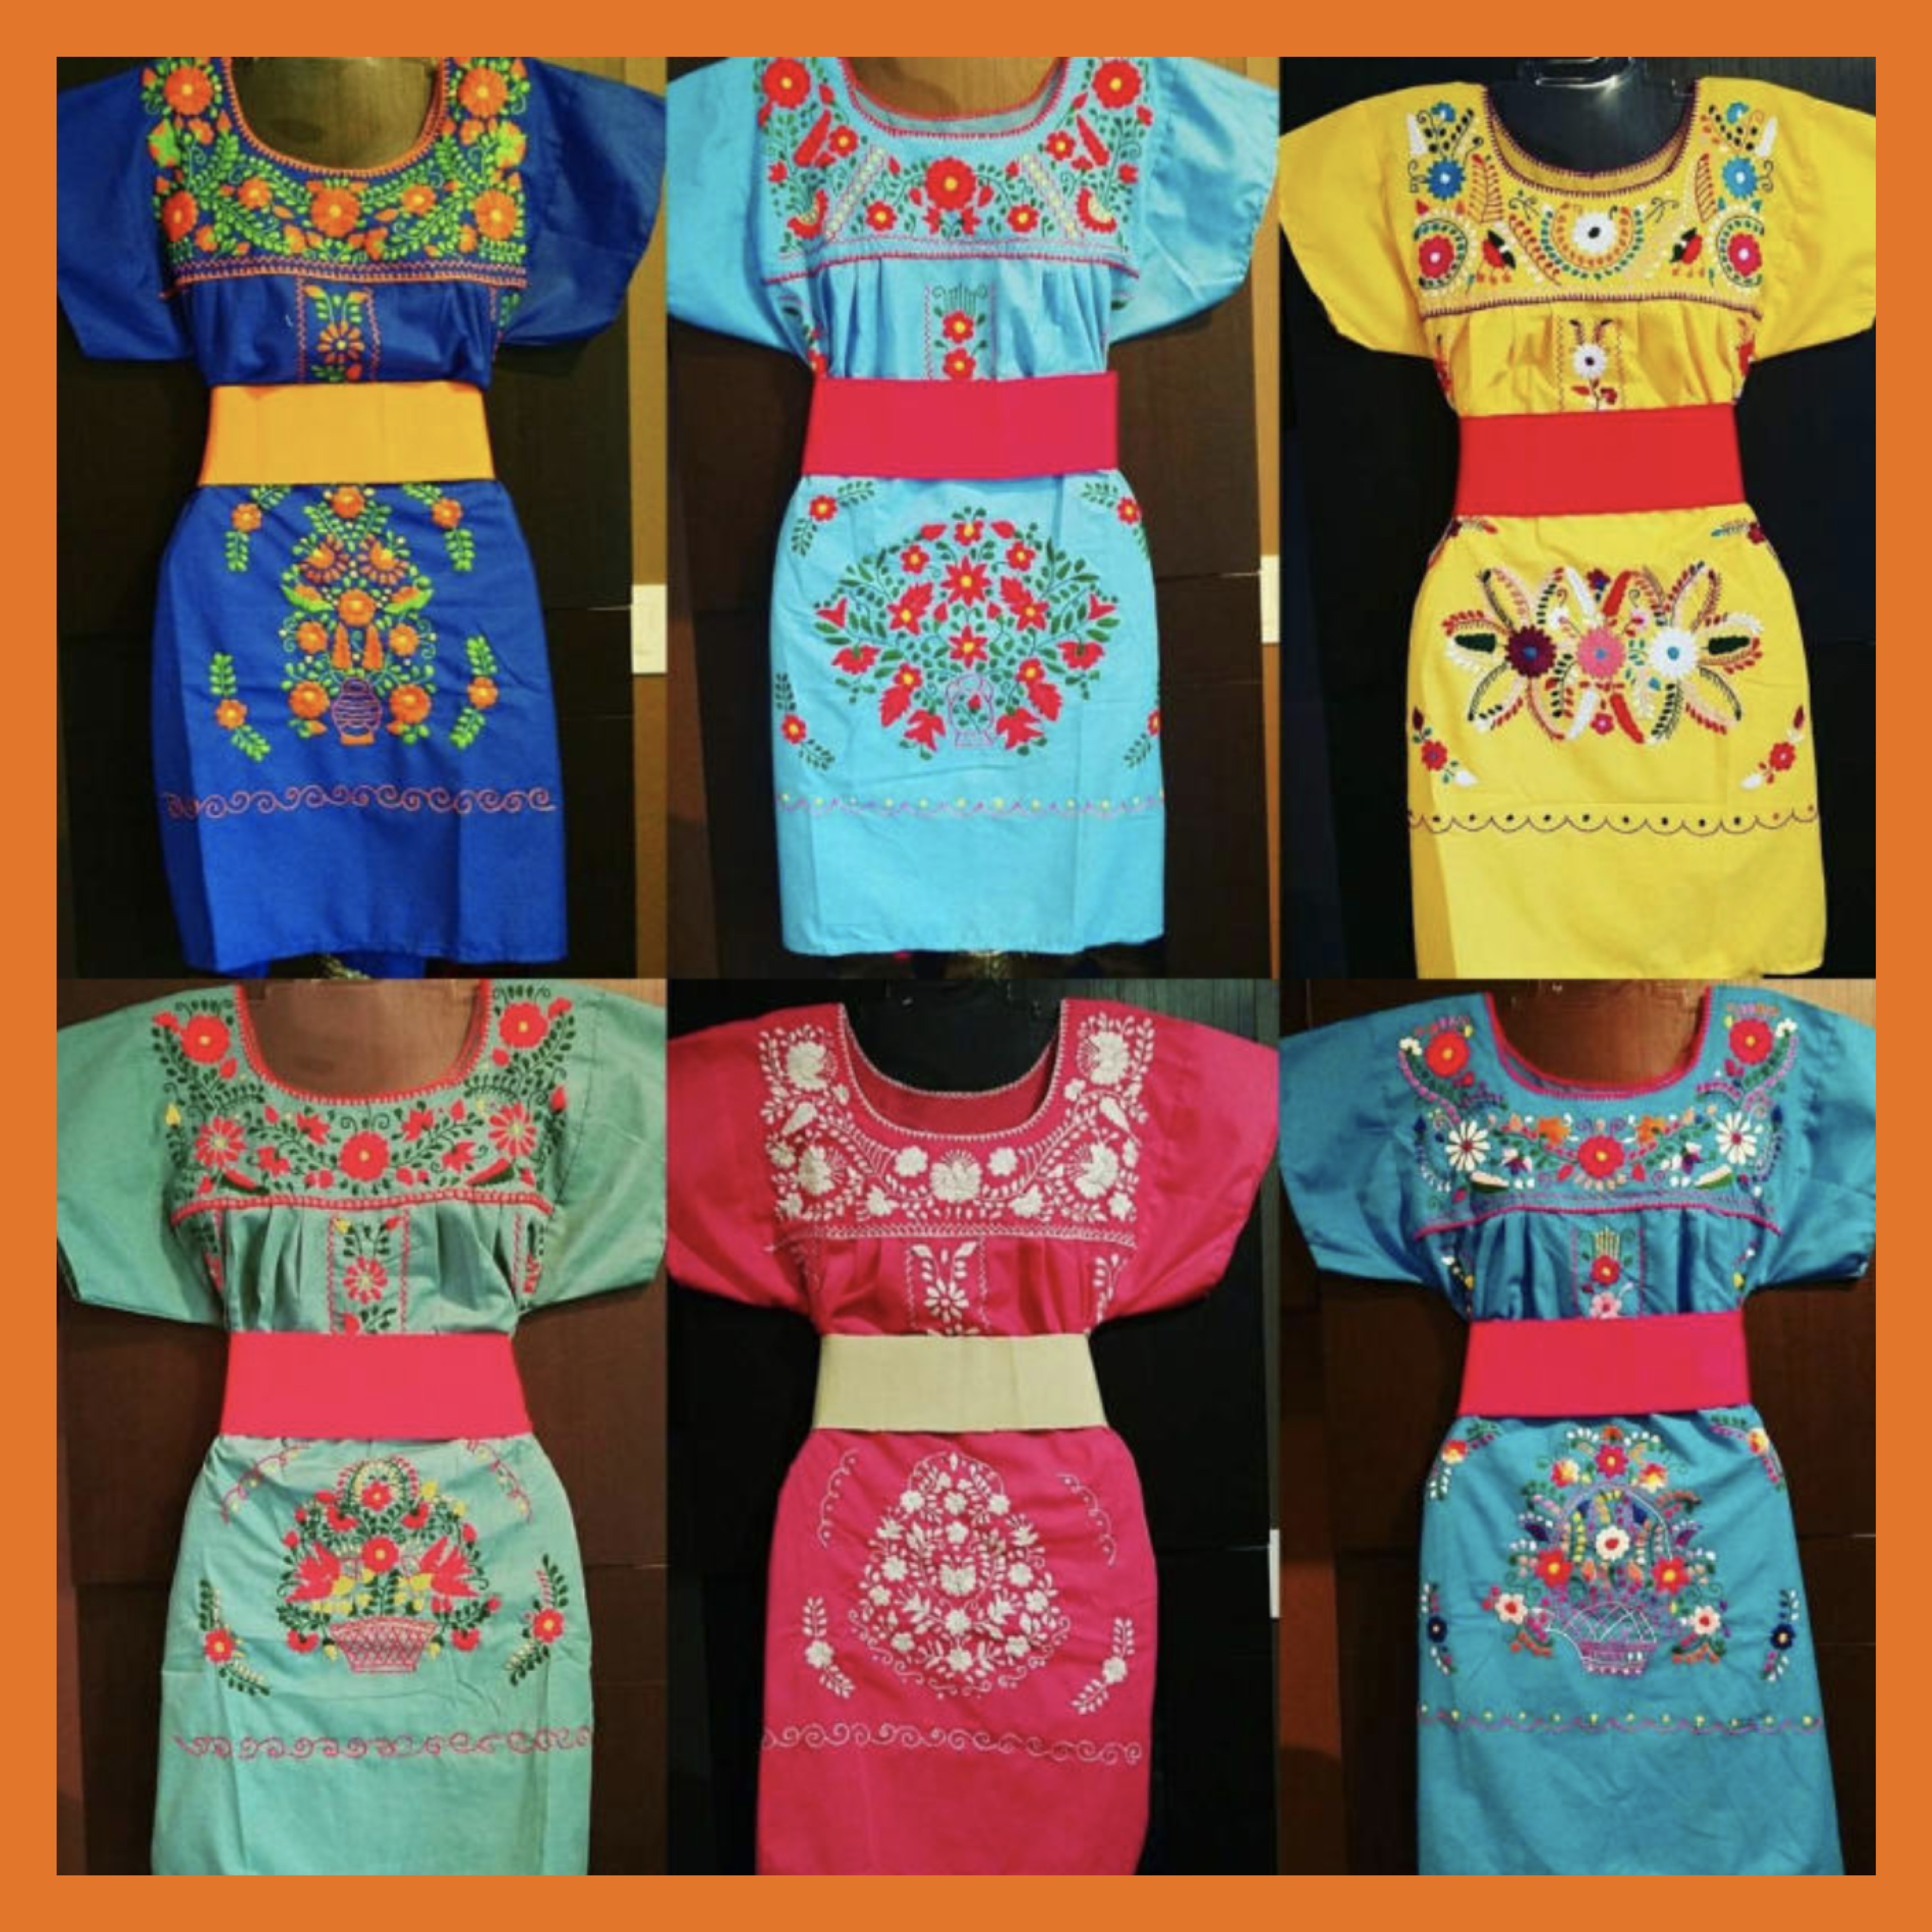 Authentic Hand Embroided Mexican Dresses in Chicago, IL for $45